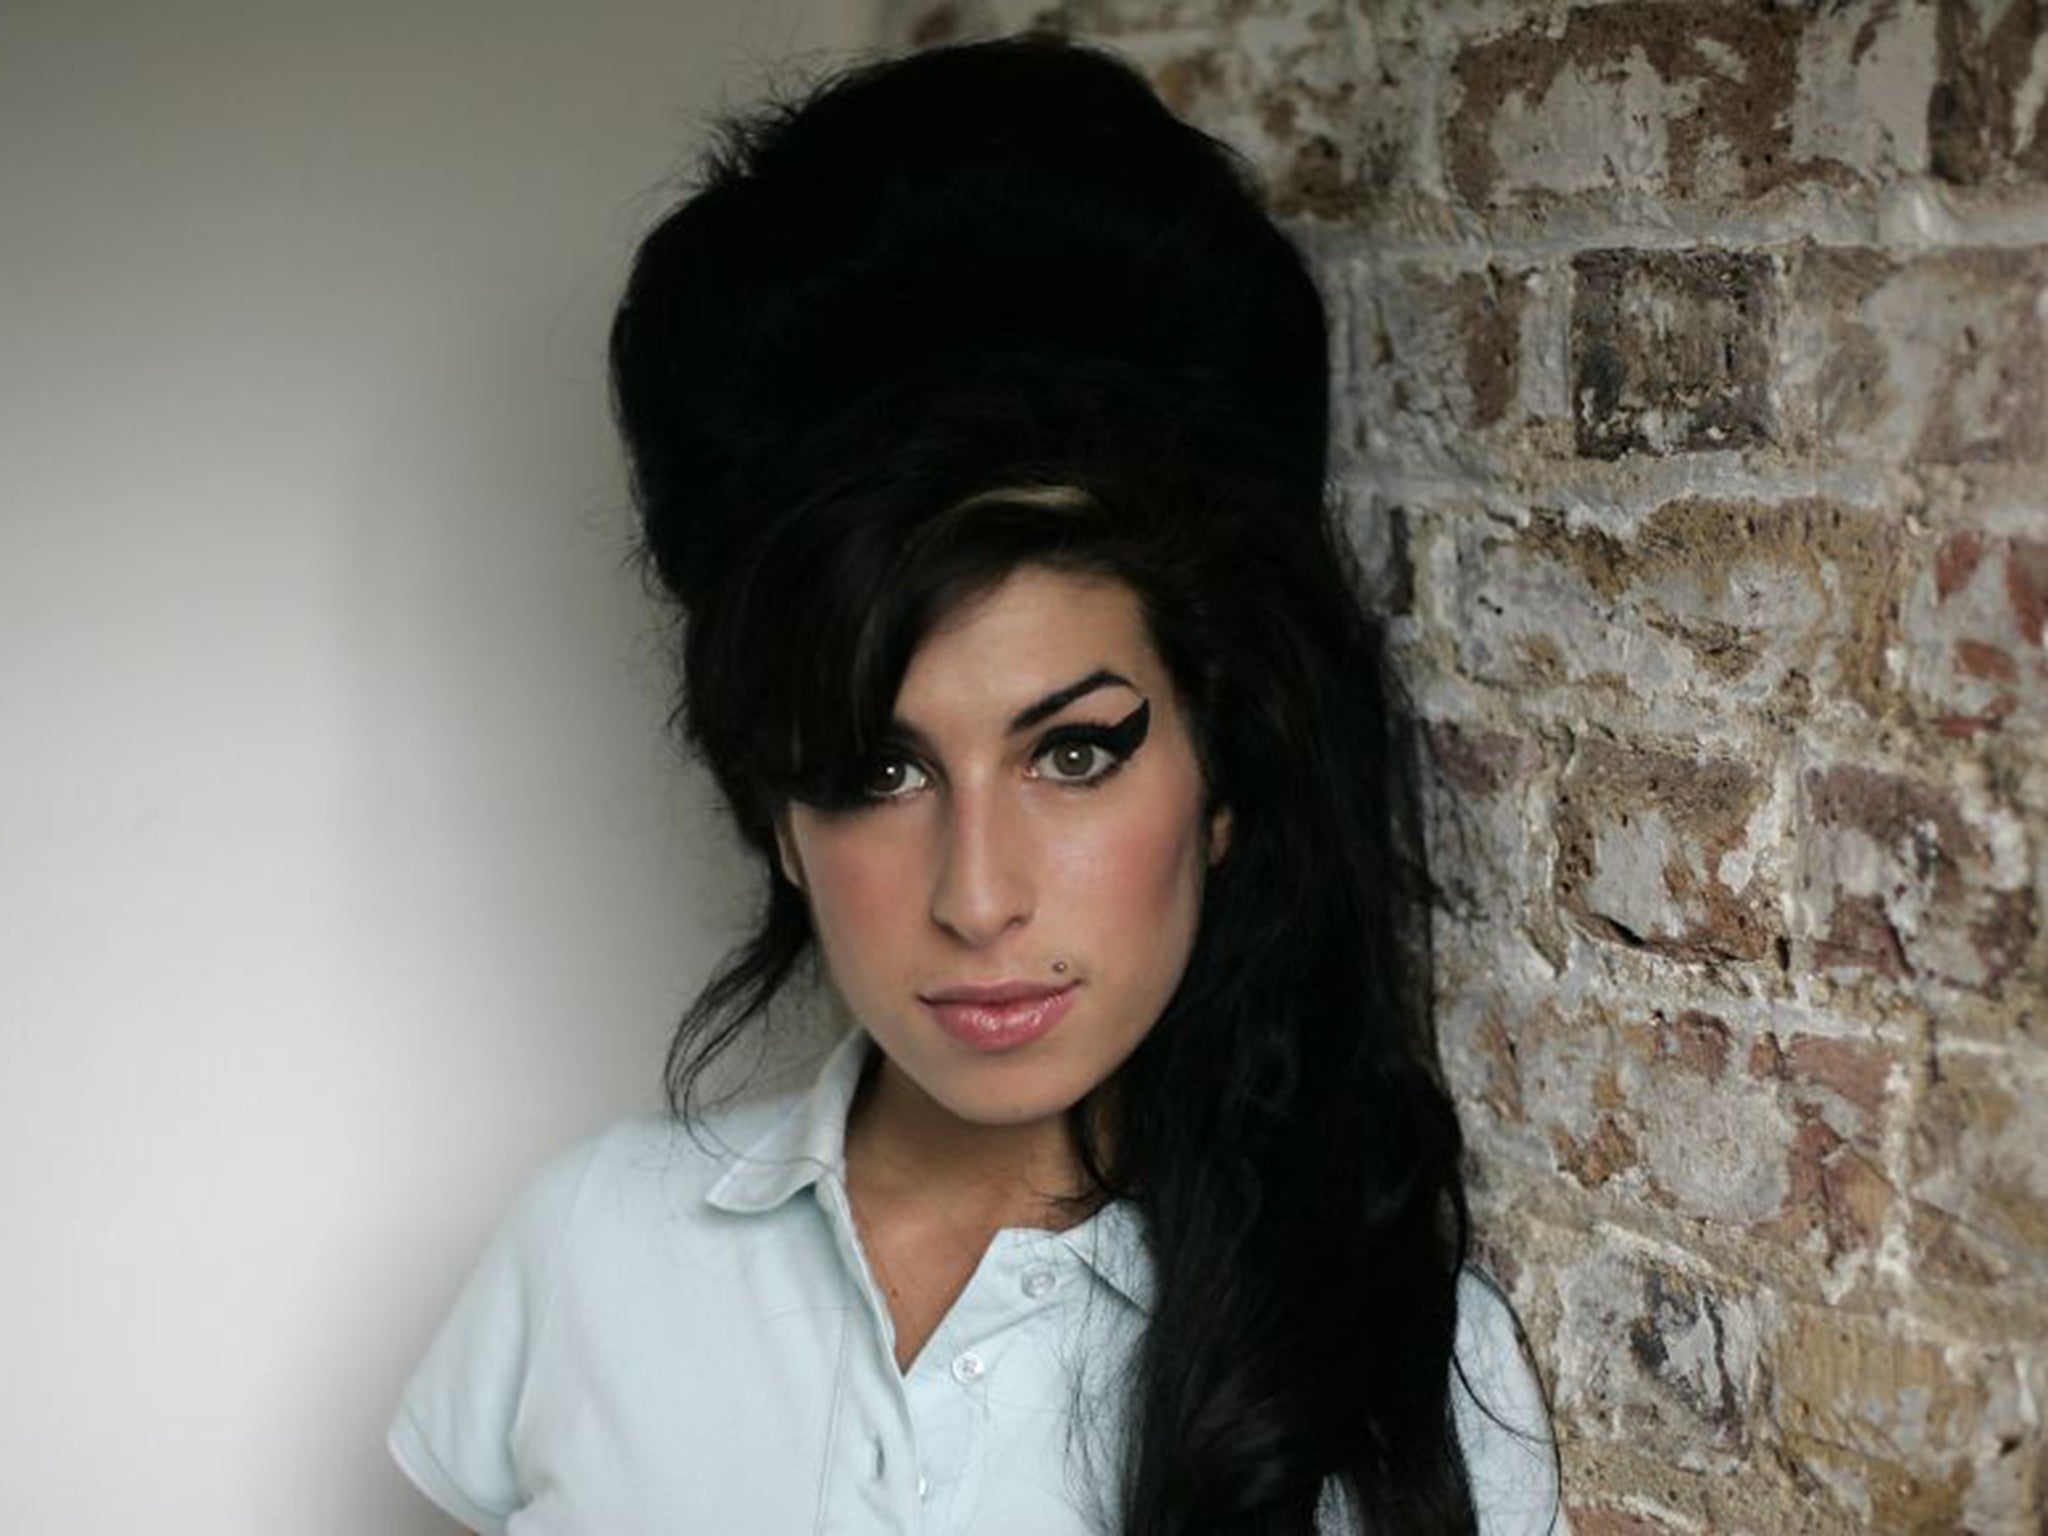 Amy Winehouse: The most poignant thing late singer said in her final interview